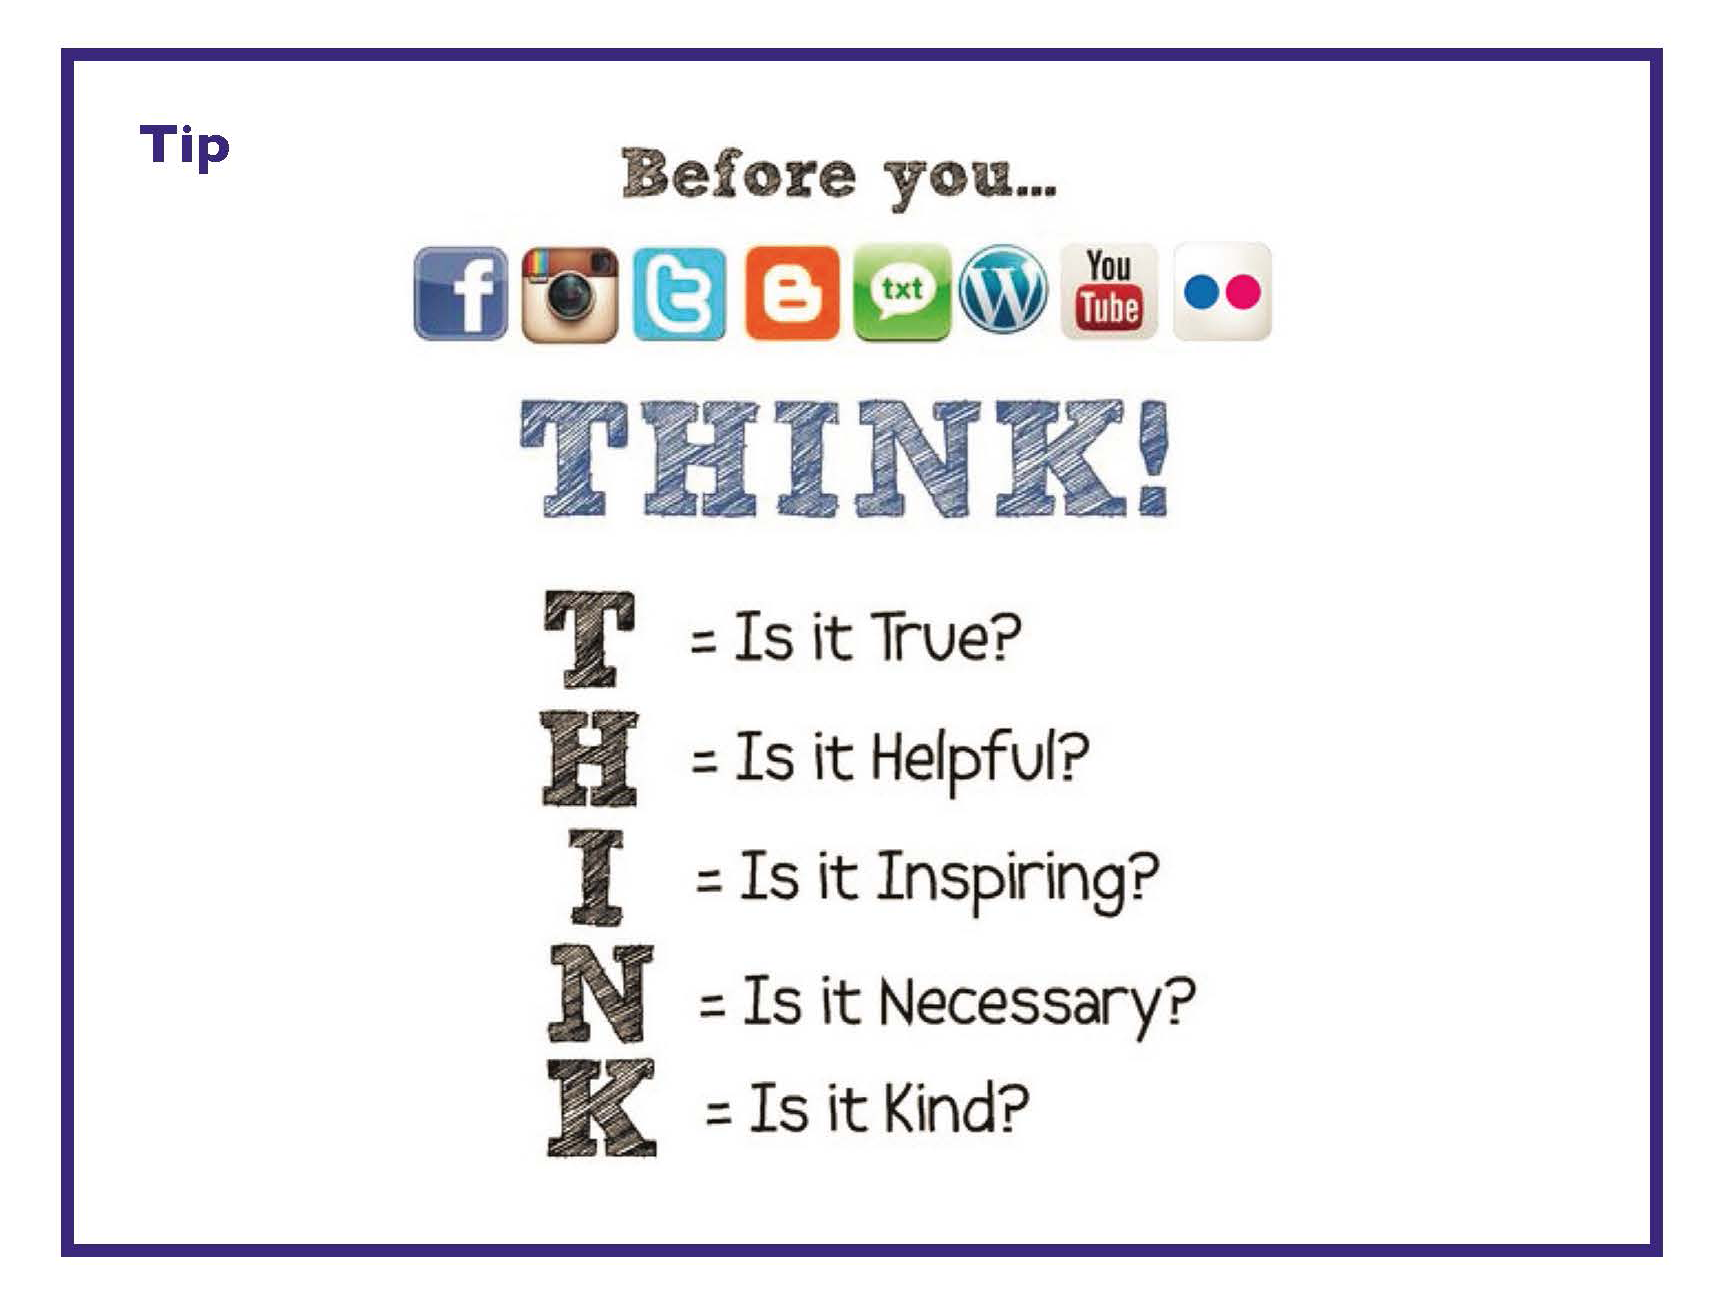 Before posting on social media think! Ask yourself is it true, is it helpful, is it inspiring, is it necessary and is it kind.